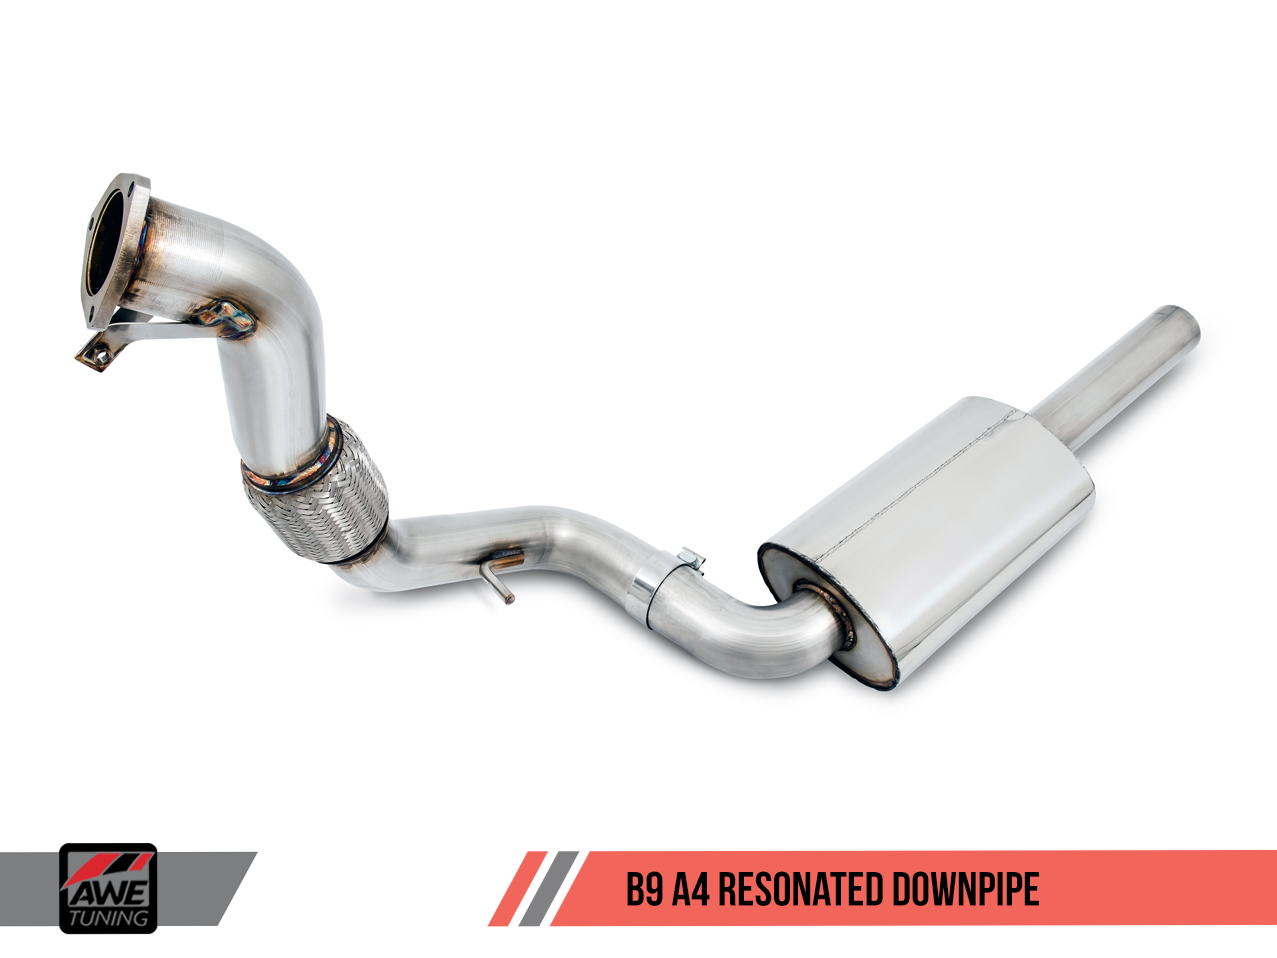 AWE Touring Edition Exhaust for B9 A4, Dual Outlet (includes DP) - Motorsports LA